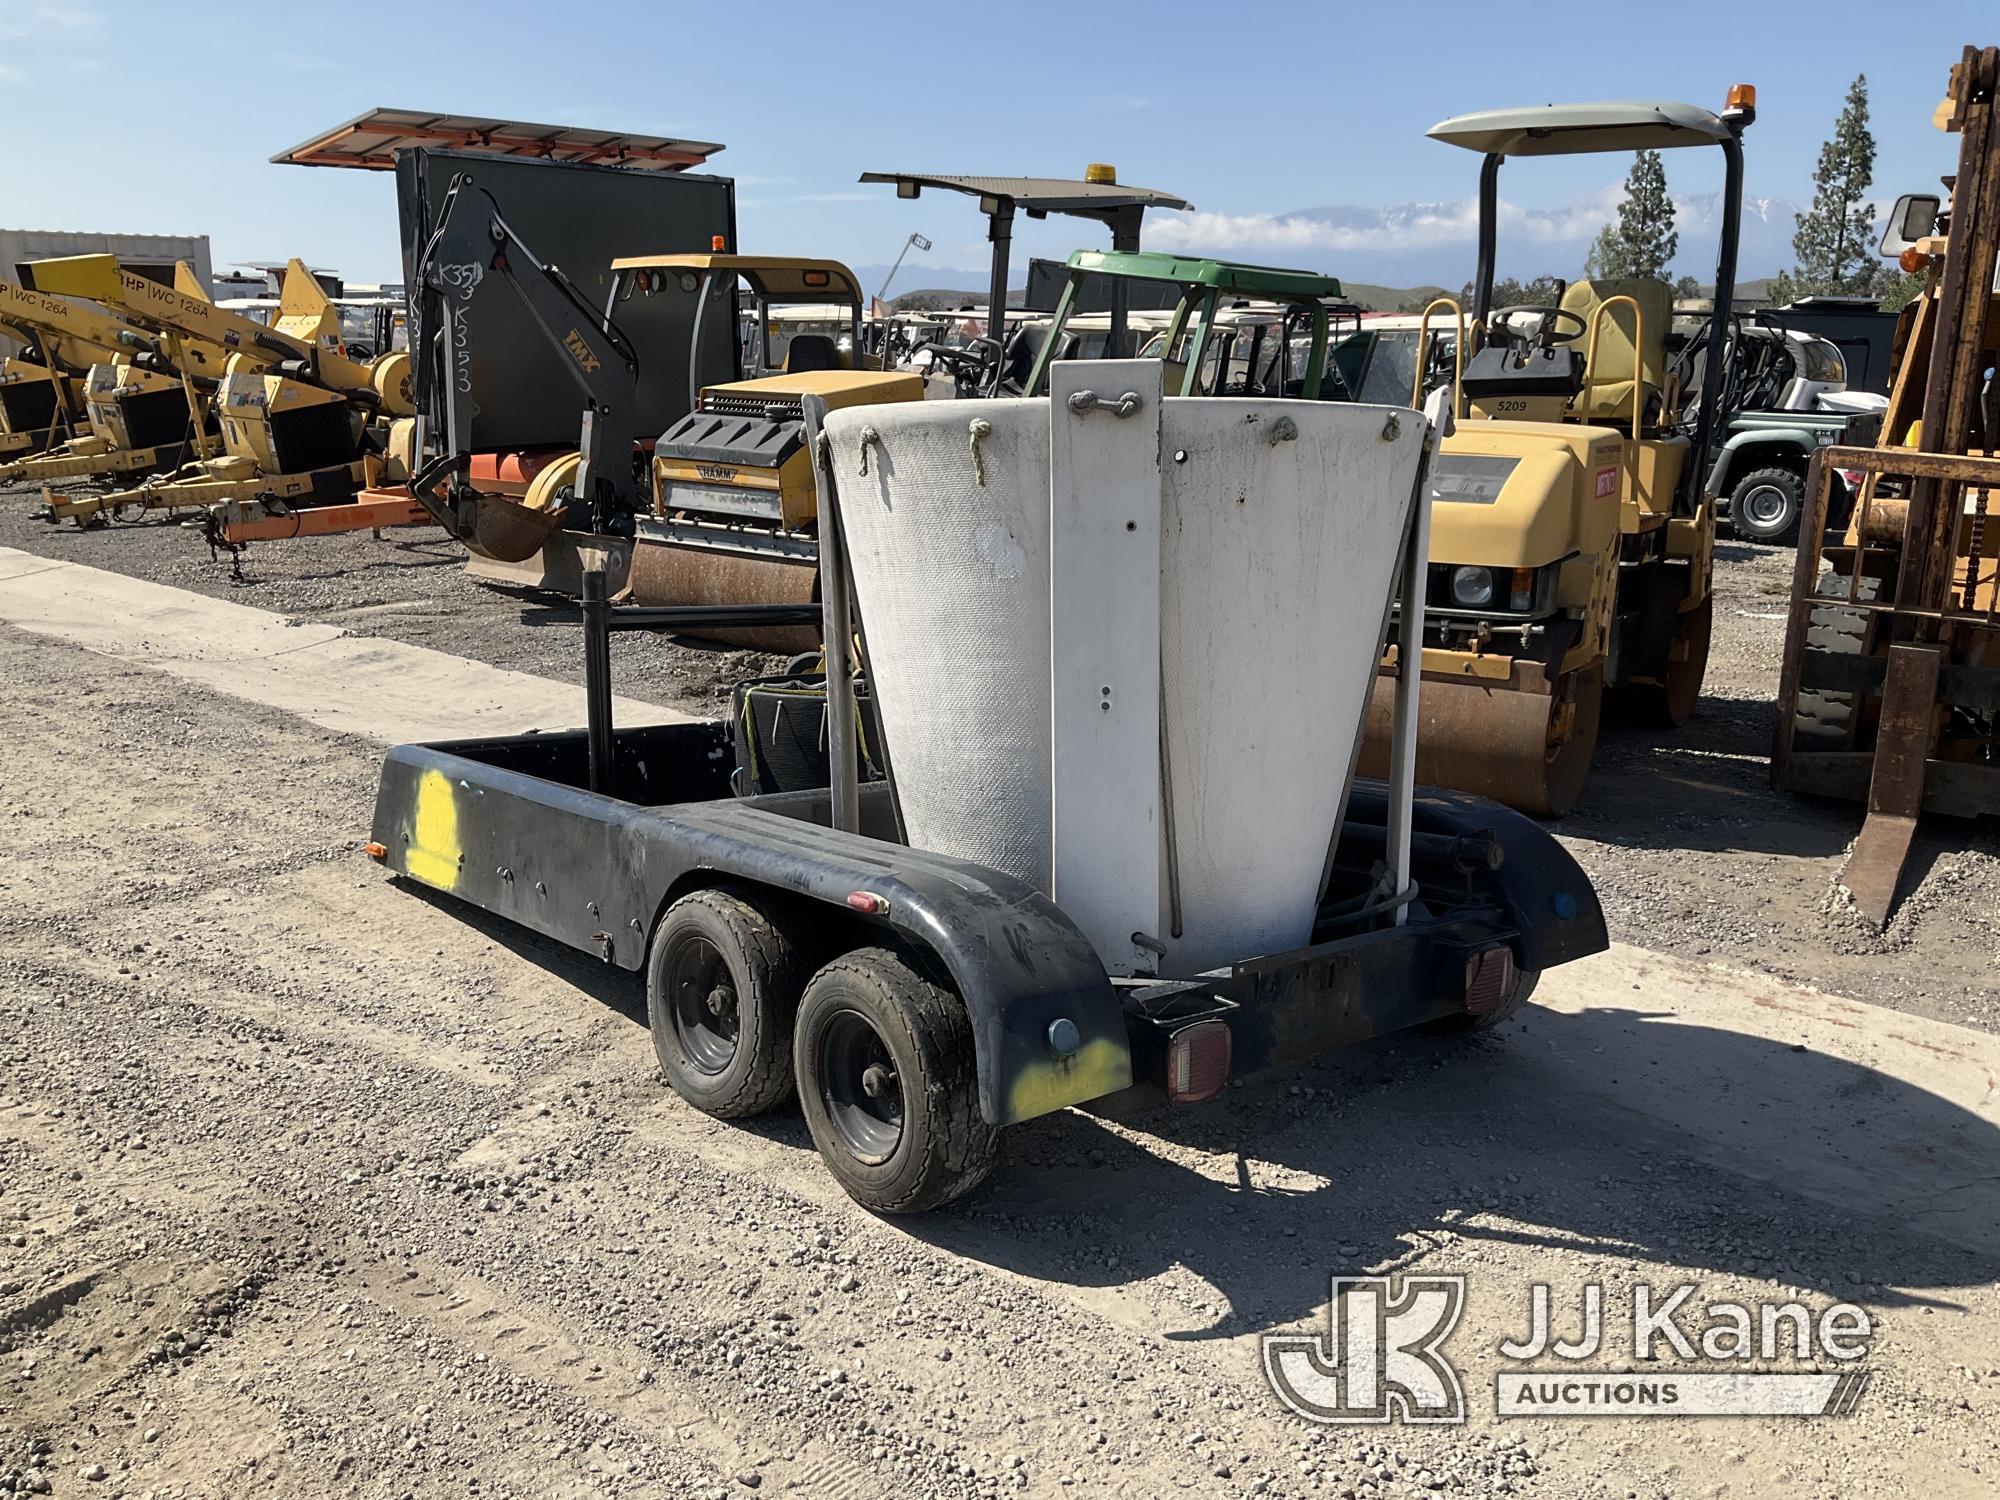 (Jurupa Valley, CA) Utility Trailer Operation Unknown, Missing VIN Plate, Bill of Sale Only